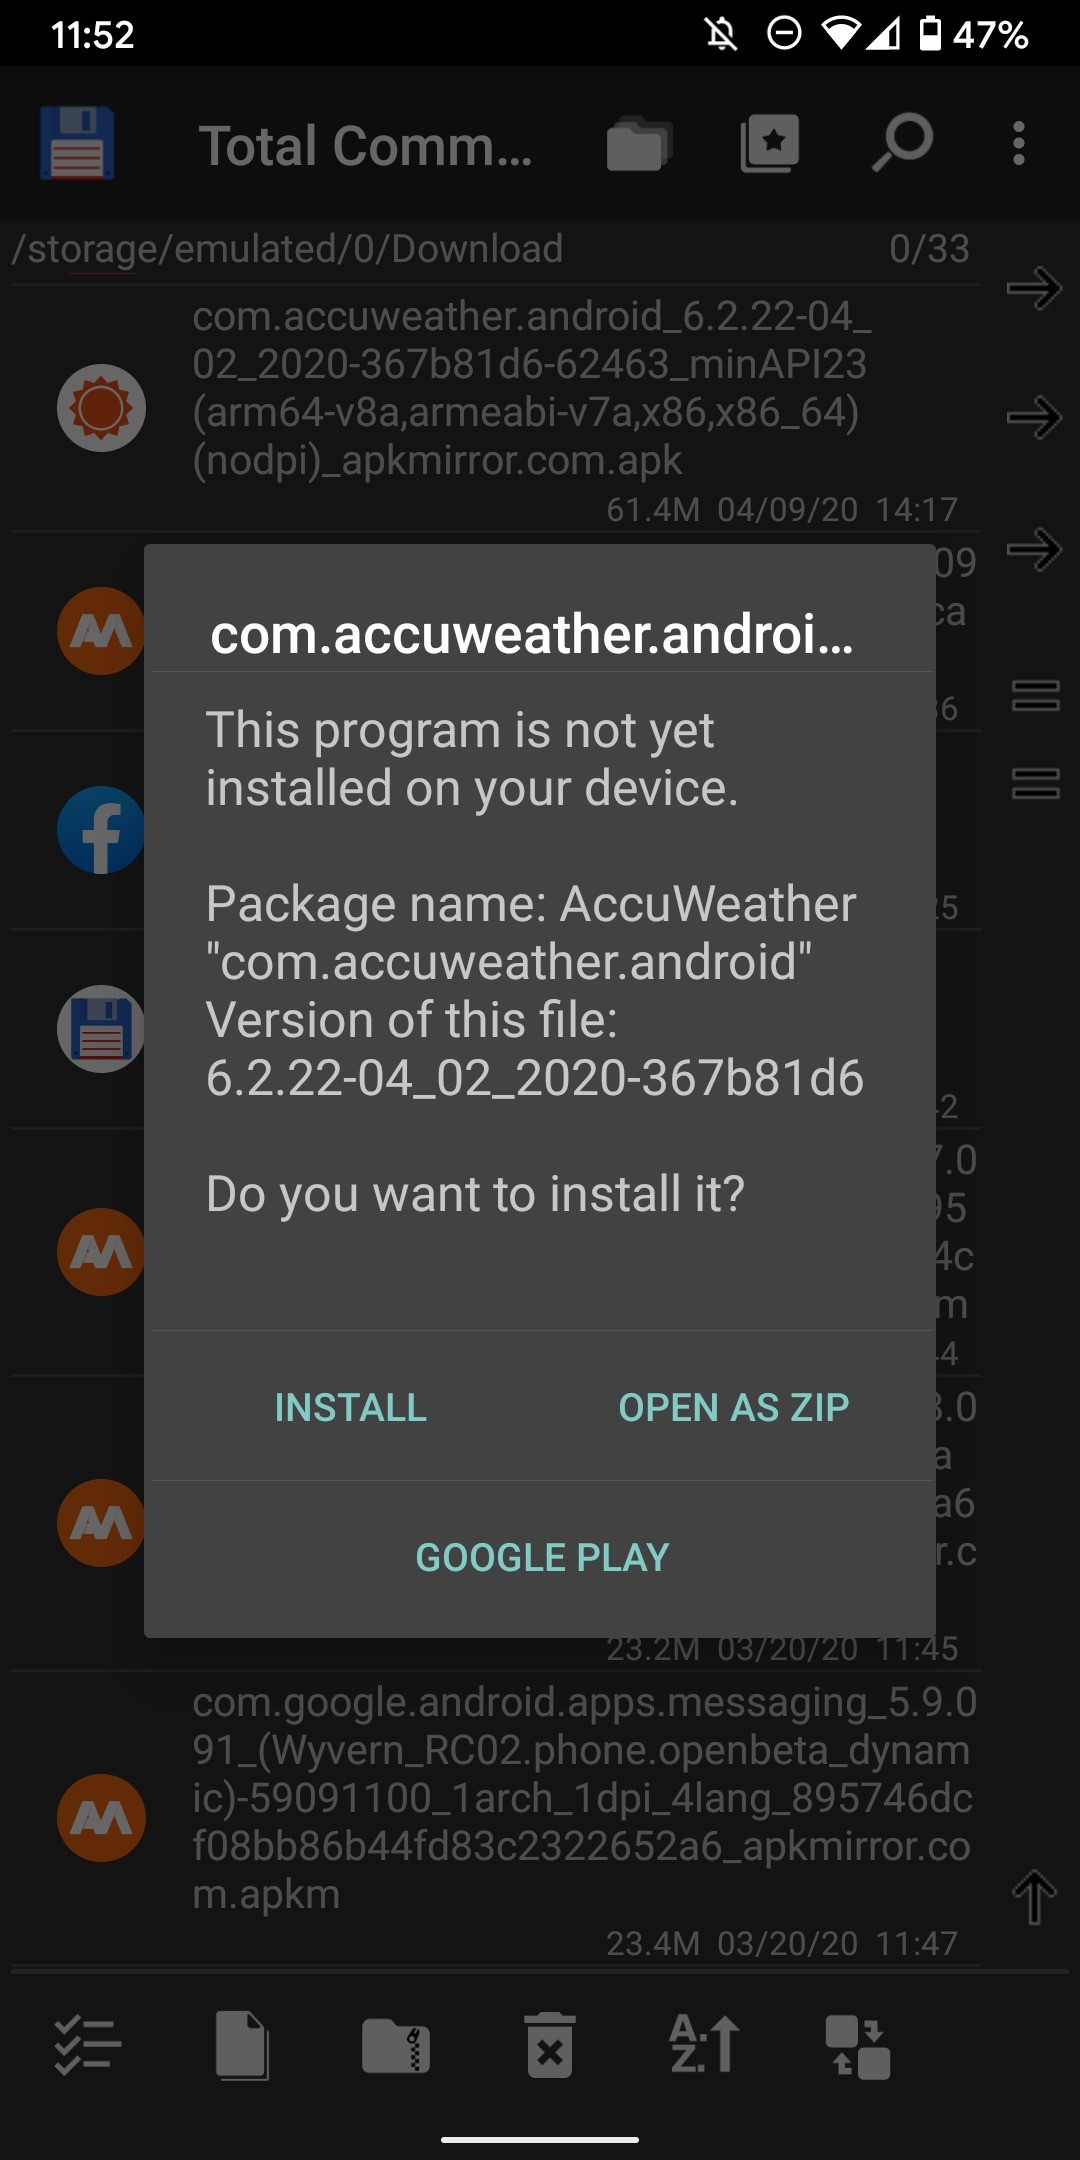 instal the last version for android One Commander 3.48.1